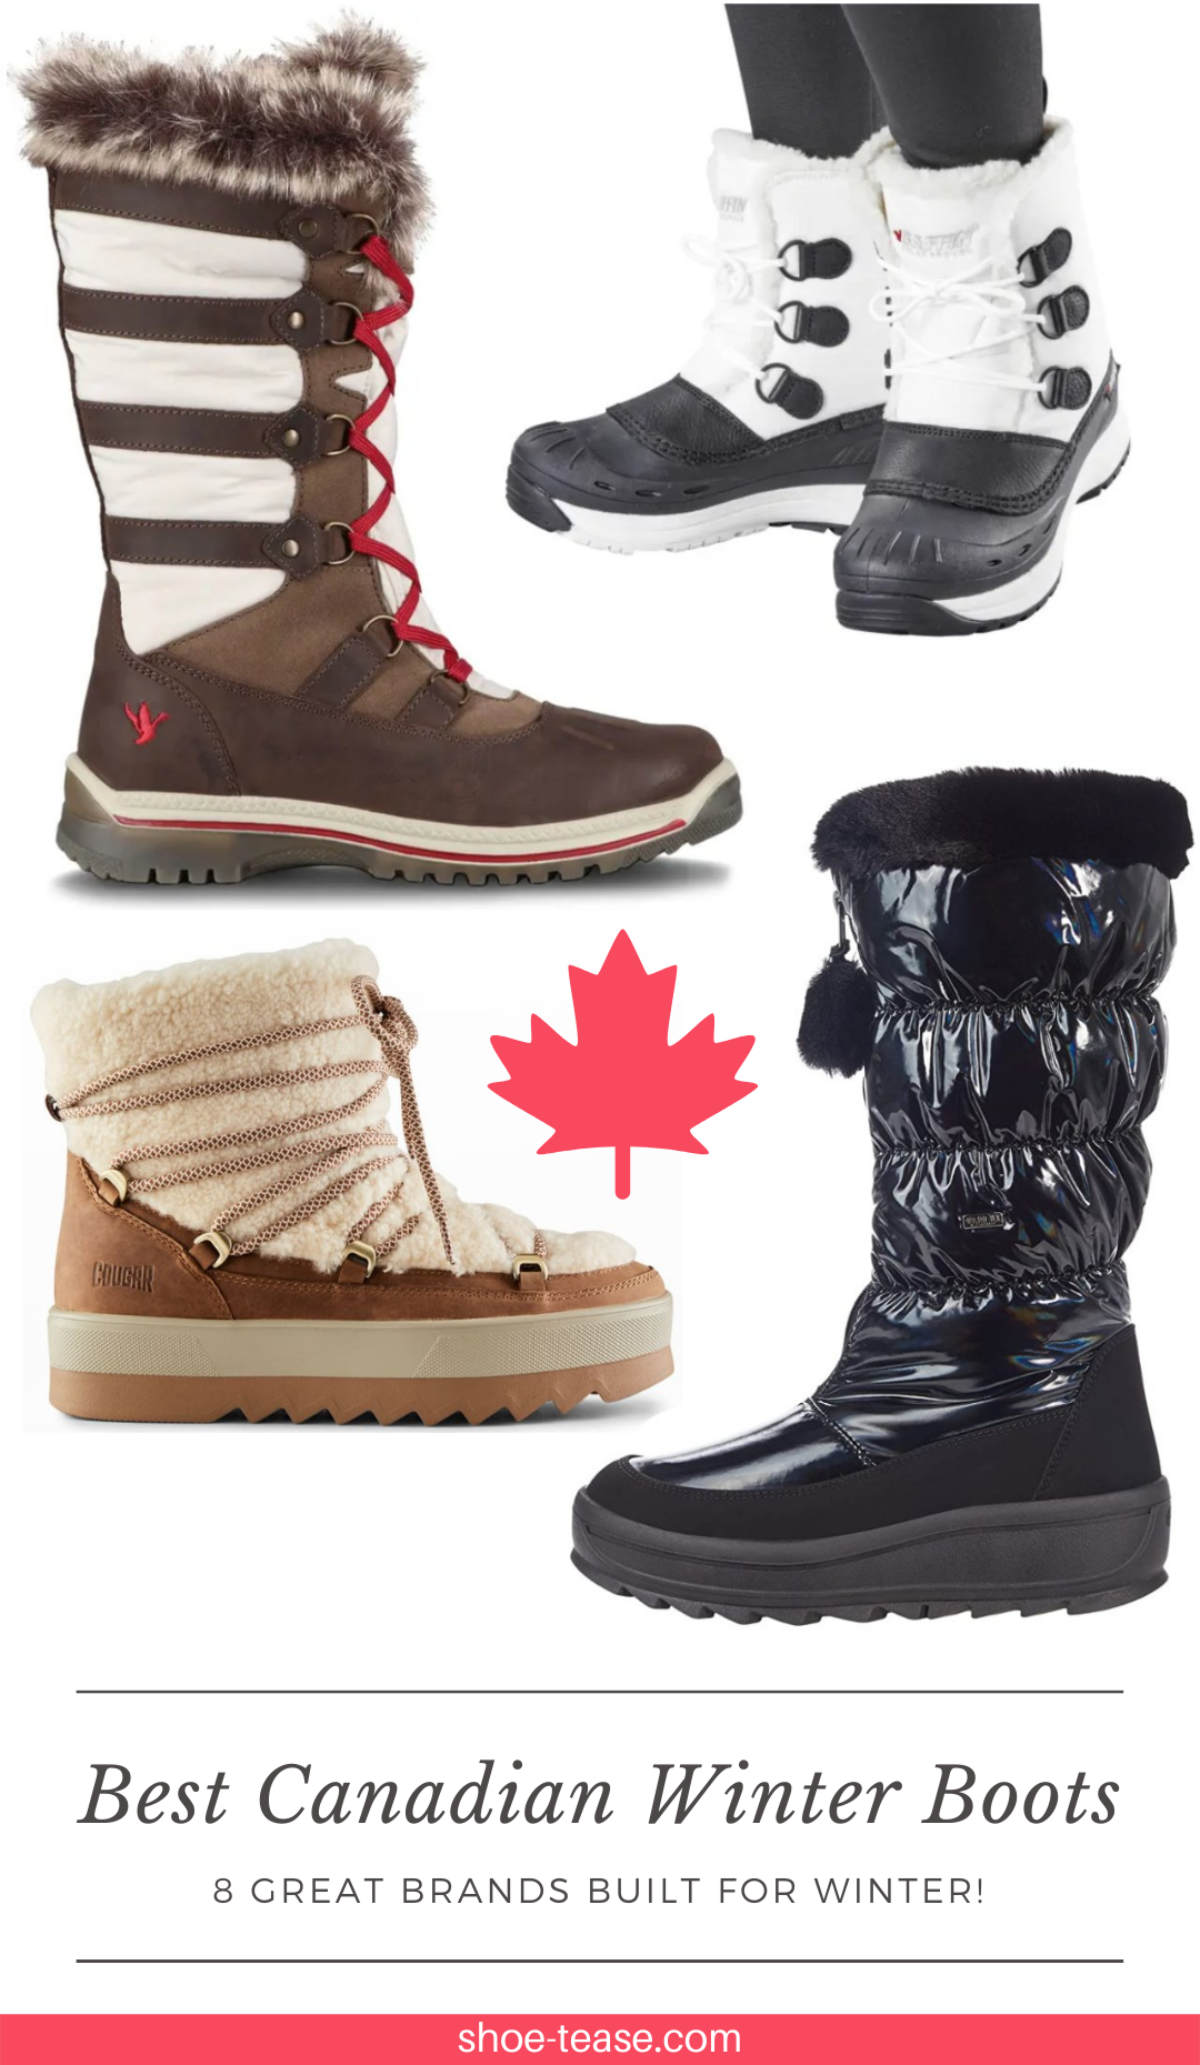 On board Chinese cabbage sample 8 Best Canadian Winter Boots to Keep Warm in the Snow & Cold - 2022